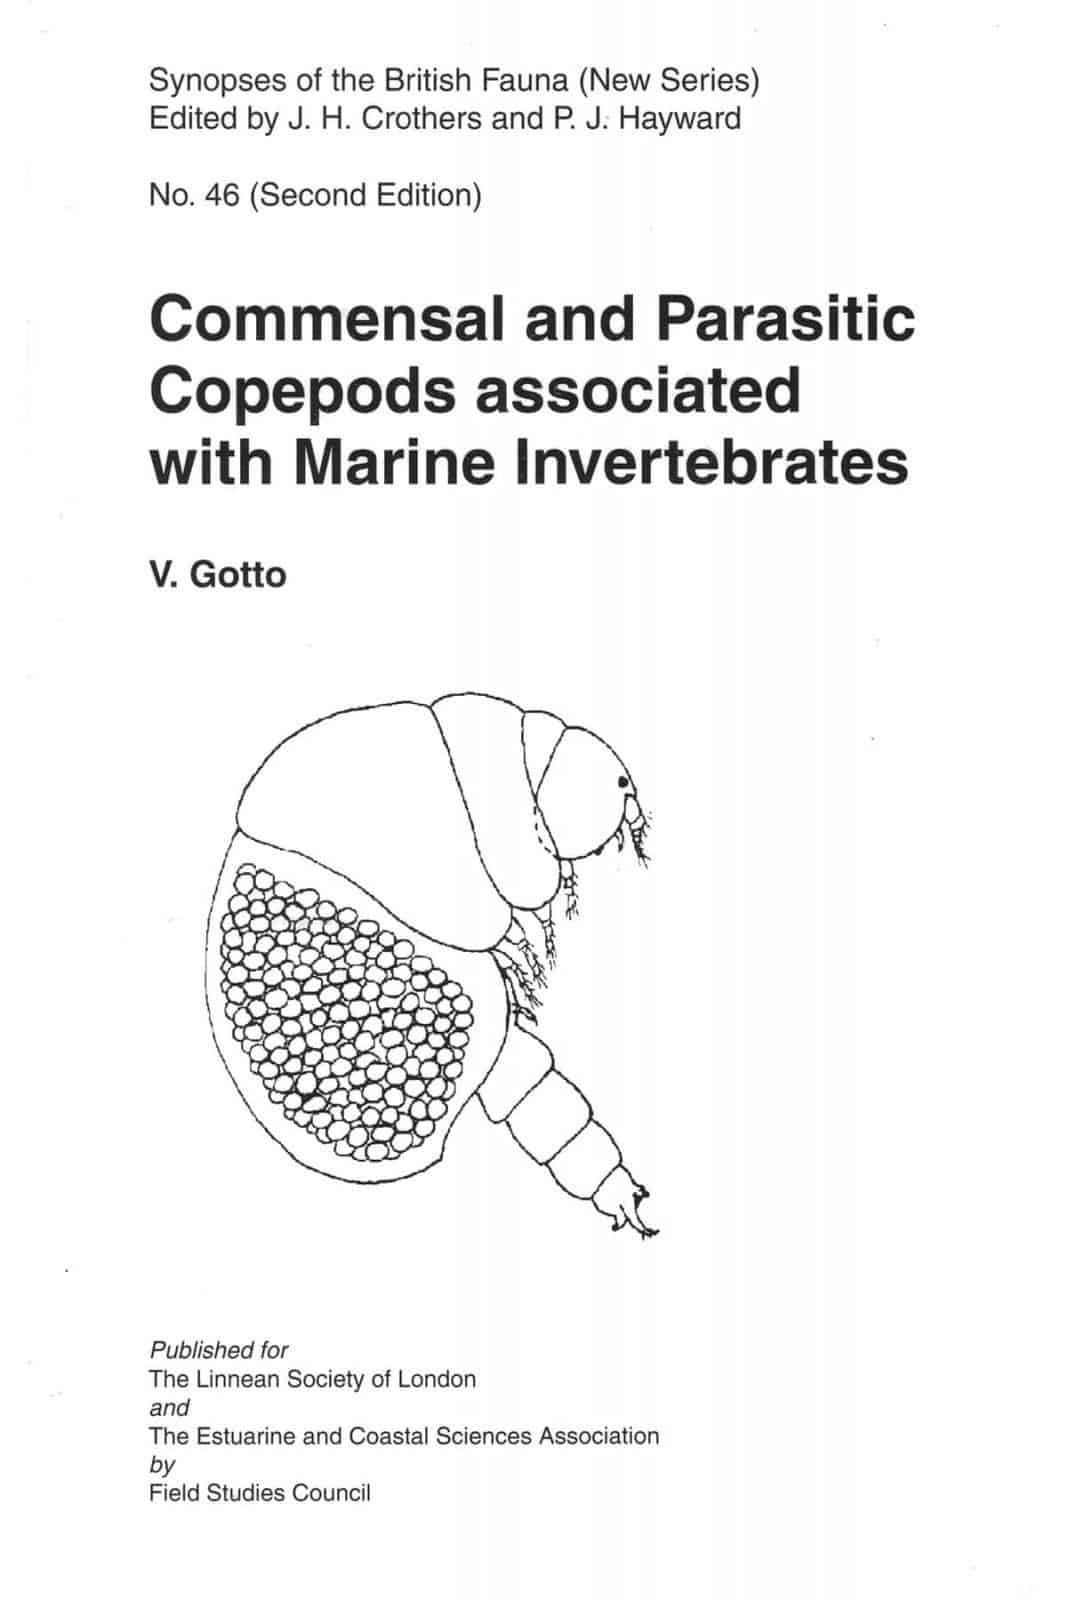 Commensal and parasitic copepods